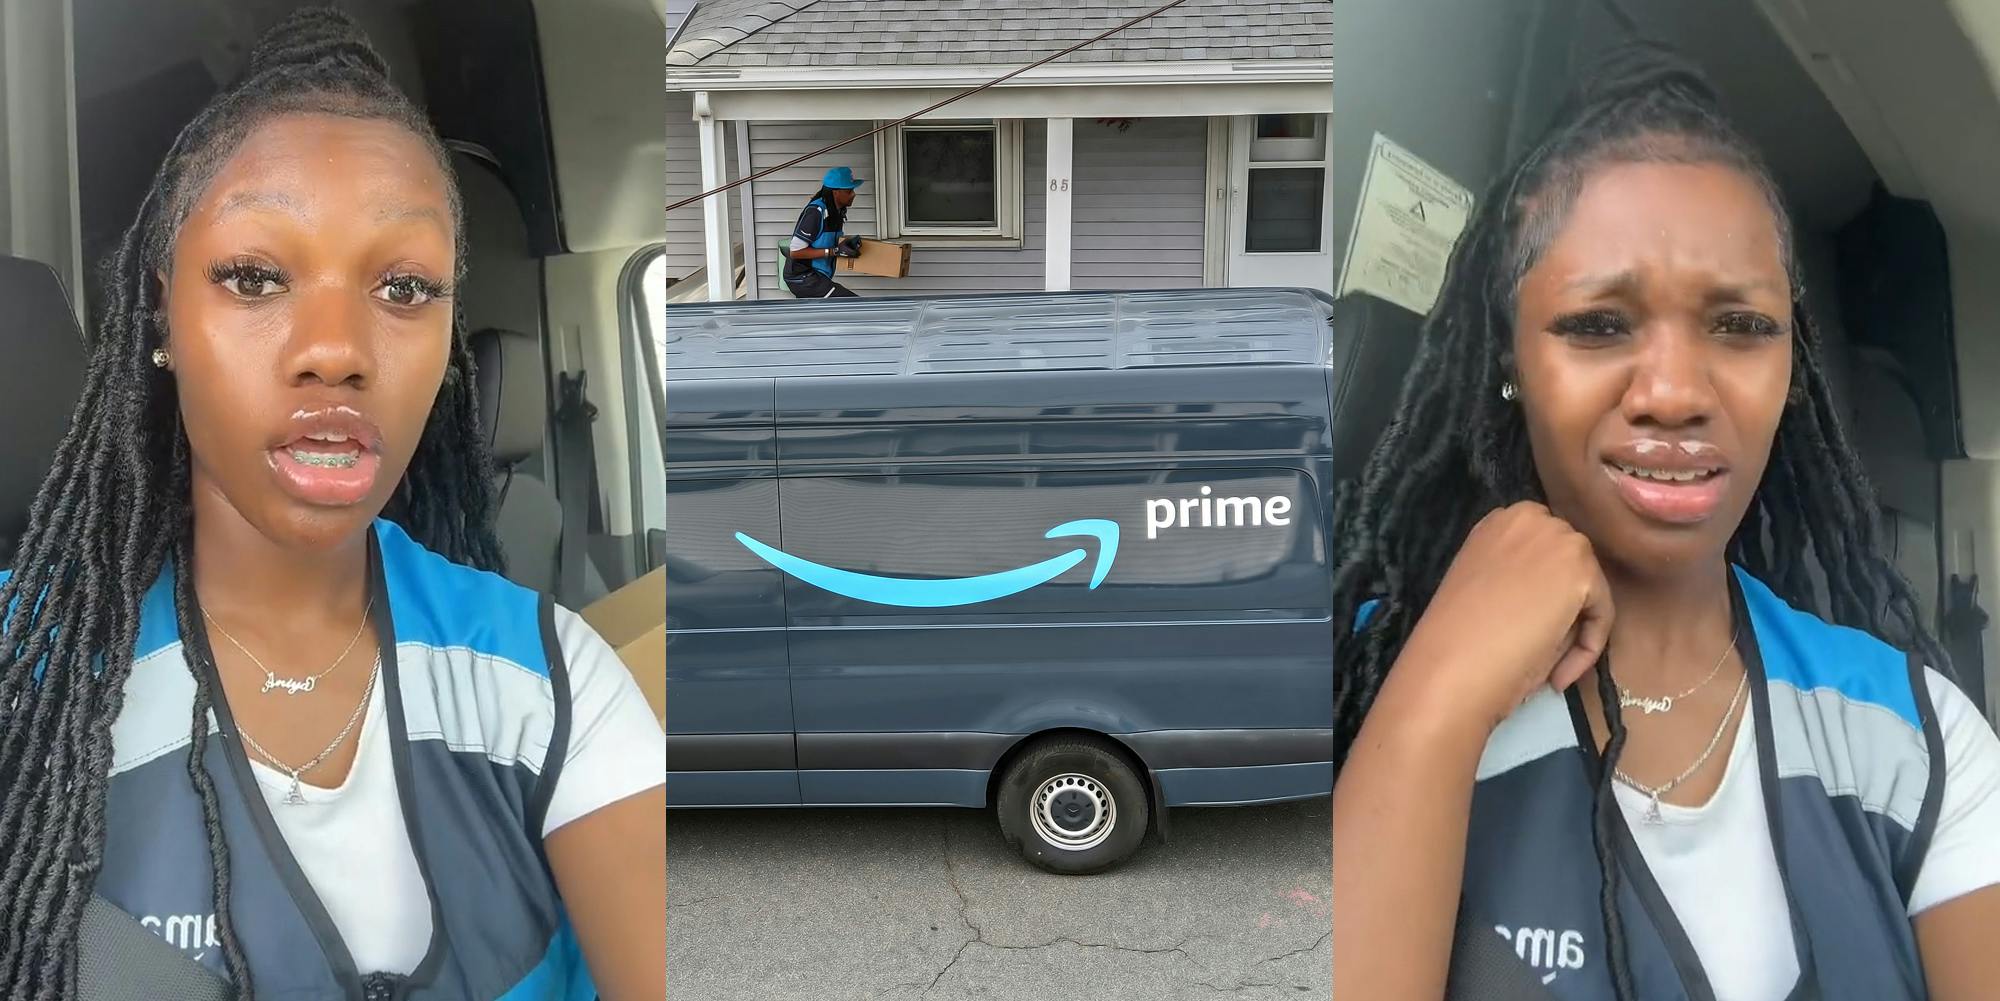 Amazon driver speaking in truck (l) Amazon delivery driver delivering package to front porch (c) Amazon delivery driver speaking in truck (r)